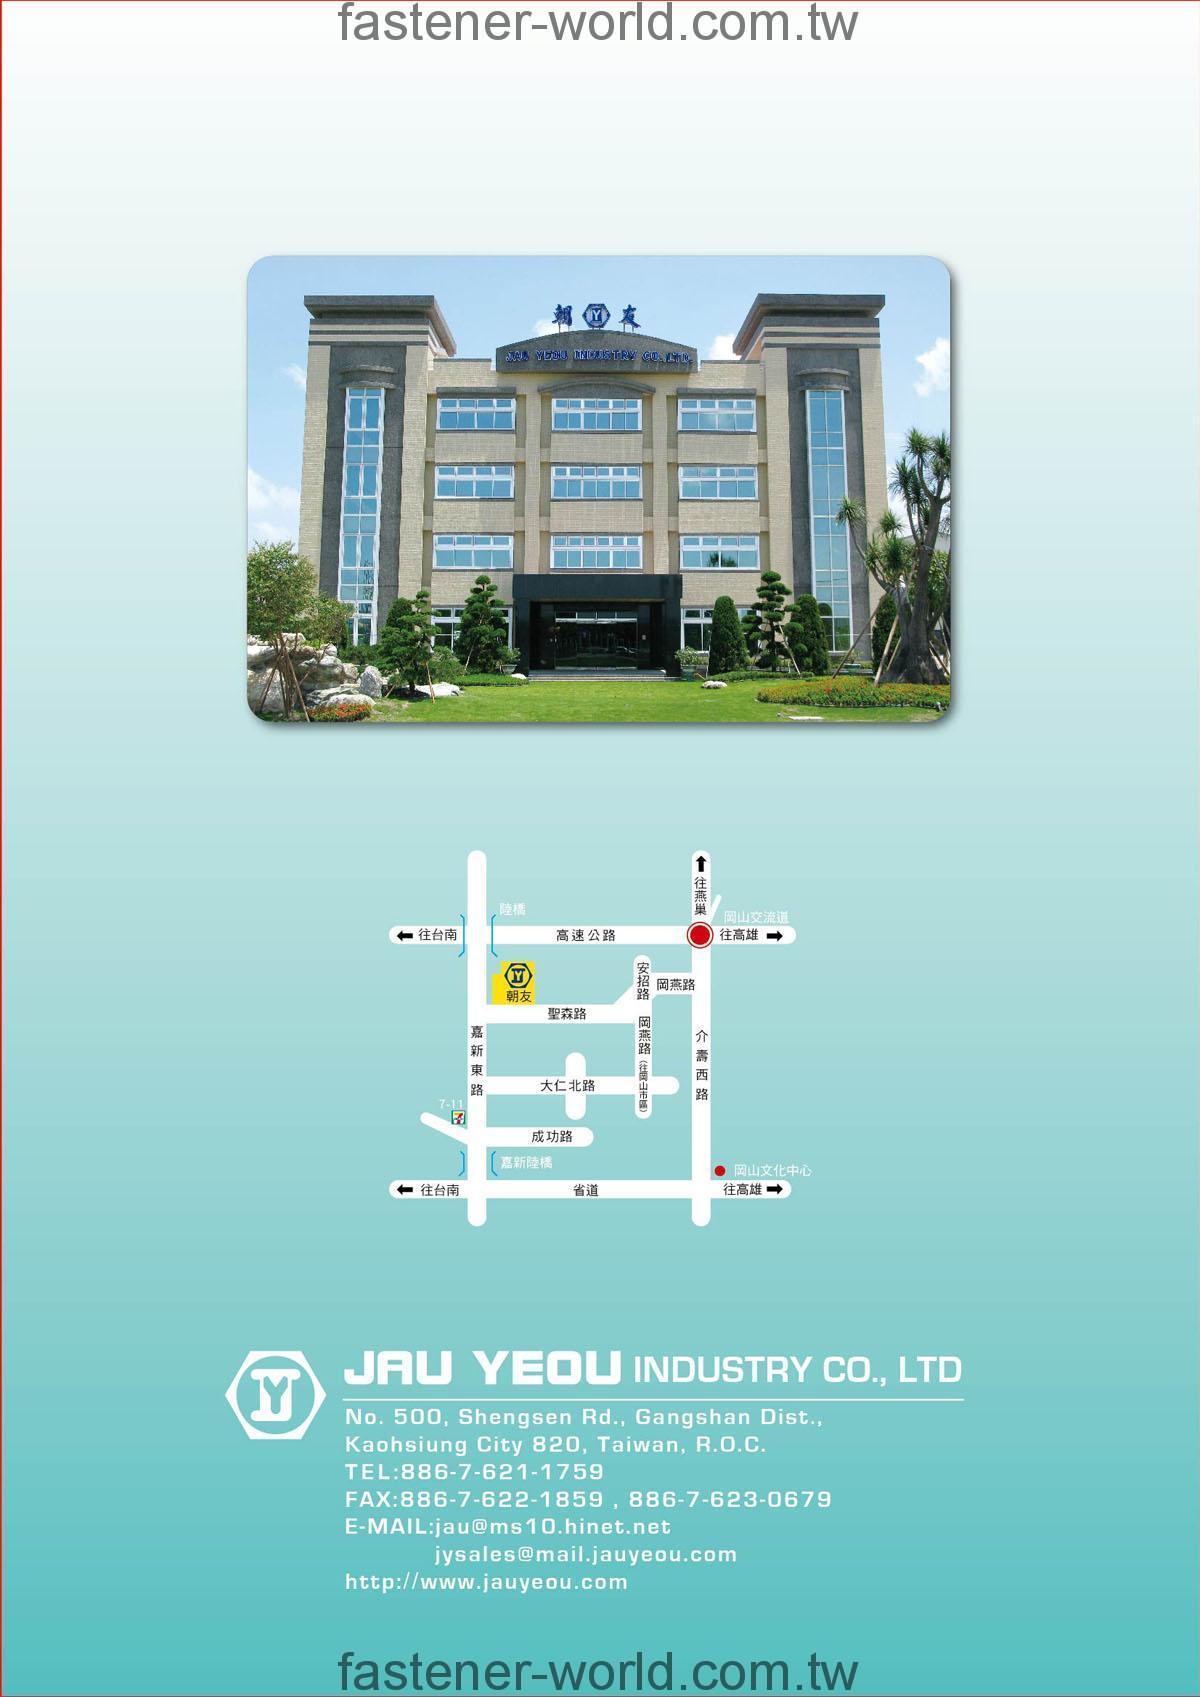 JAU YEOU INDUSTRY CO., LTD._Online Catalogues